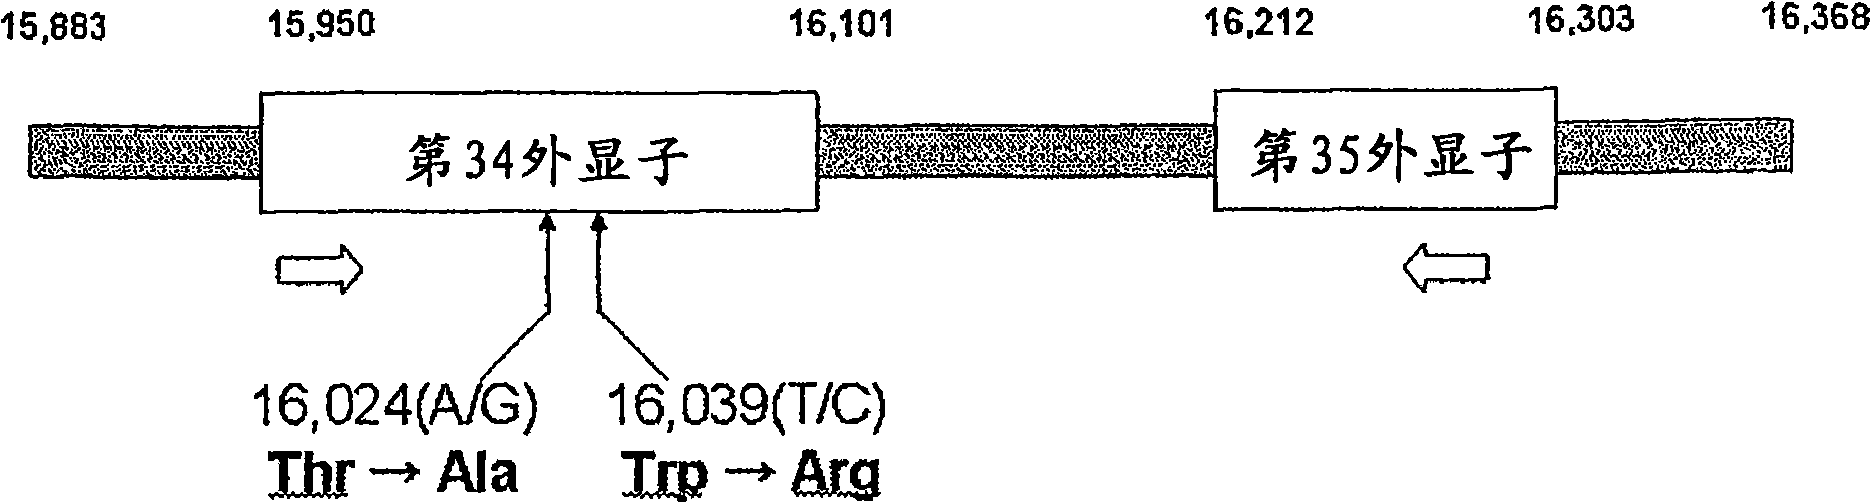 Method of determining size of fatty acid content in intramuscular fat of cattle based on genotype of fatty acid synthase and method of determining eating quality of beef based on the result